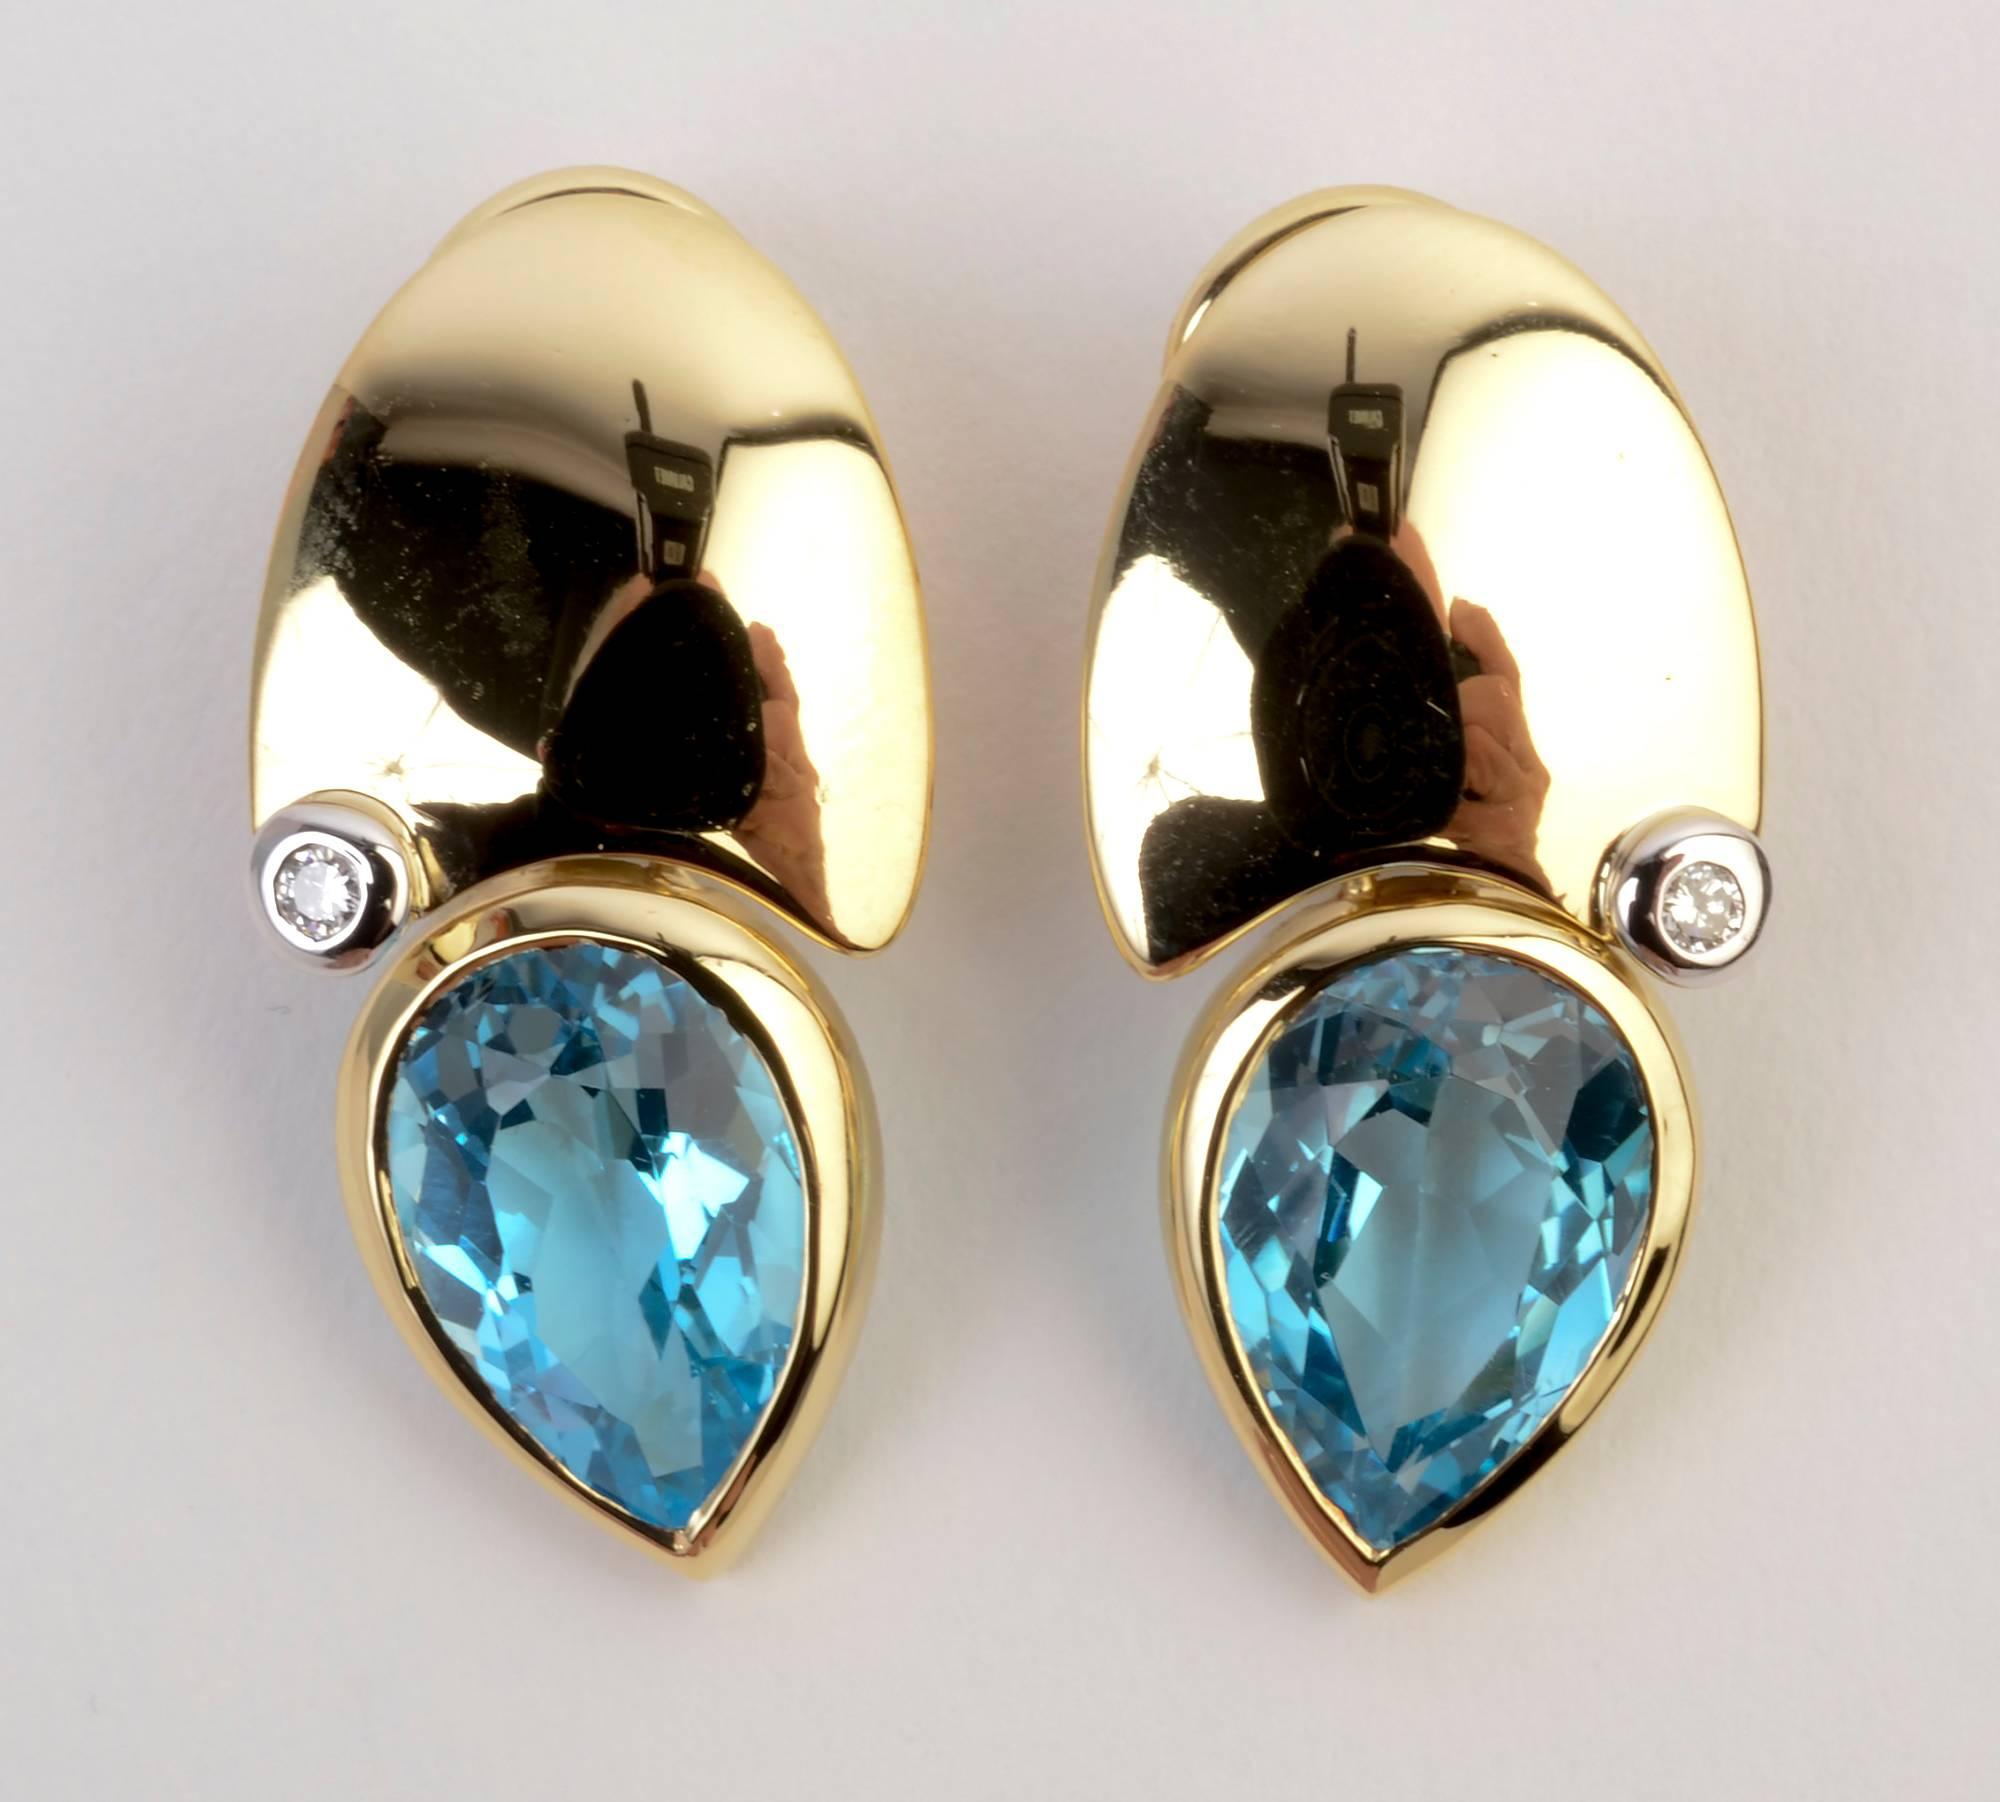 Manfredi made 18 karat gold earrings with a pear shaped blue topaz and a round diamond. The combined three shapes of the gold and the two stones make a very arty composition. The earrings are 1 1/4 inches in length and half an inch wide. Backs are